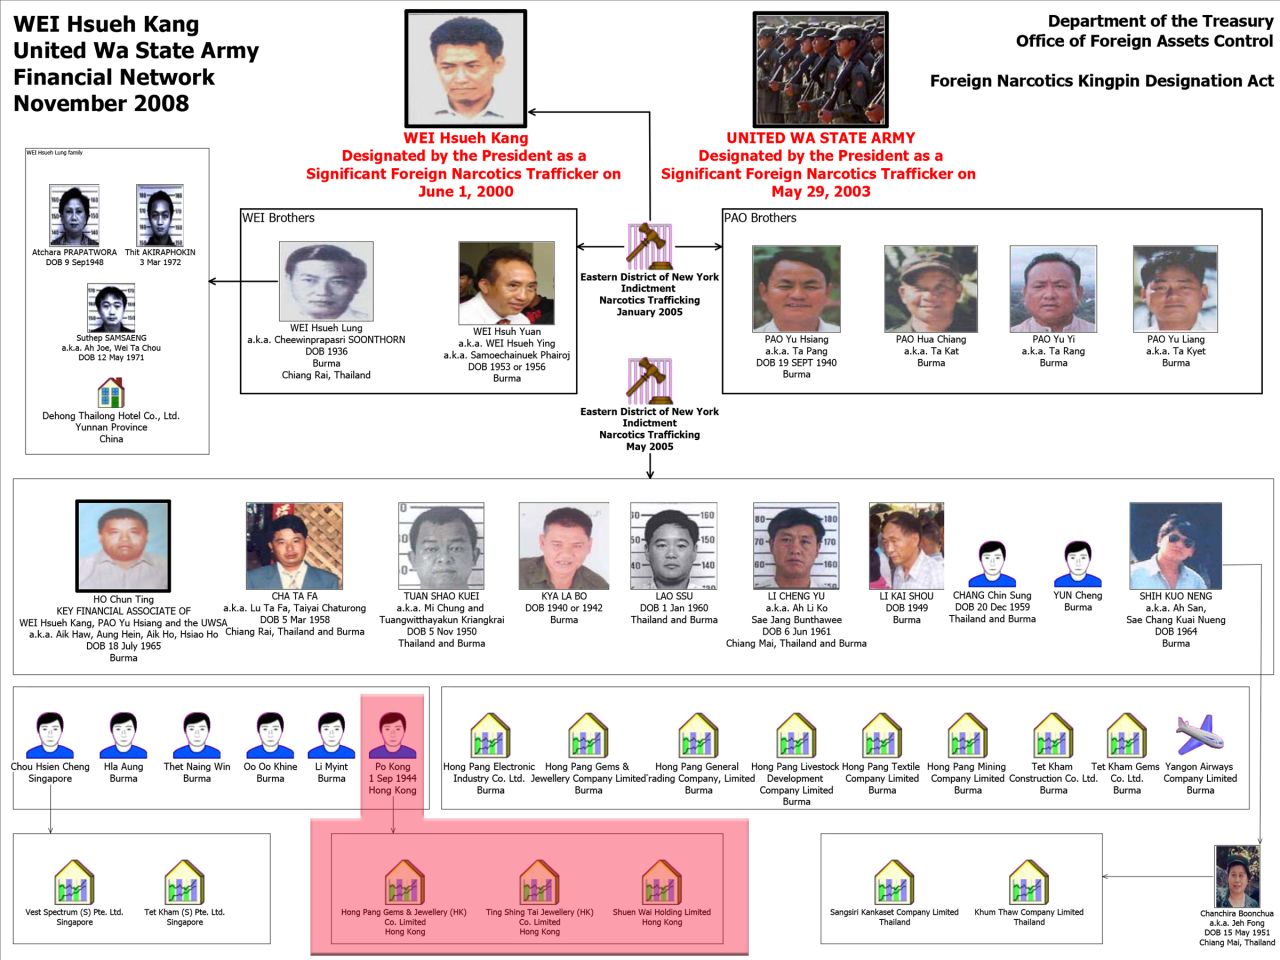 This 2008 chart from the US Treasury Department outlines the entities sanctioned that were allegedly part of the United Wa State Army's Financial Network.